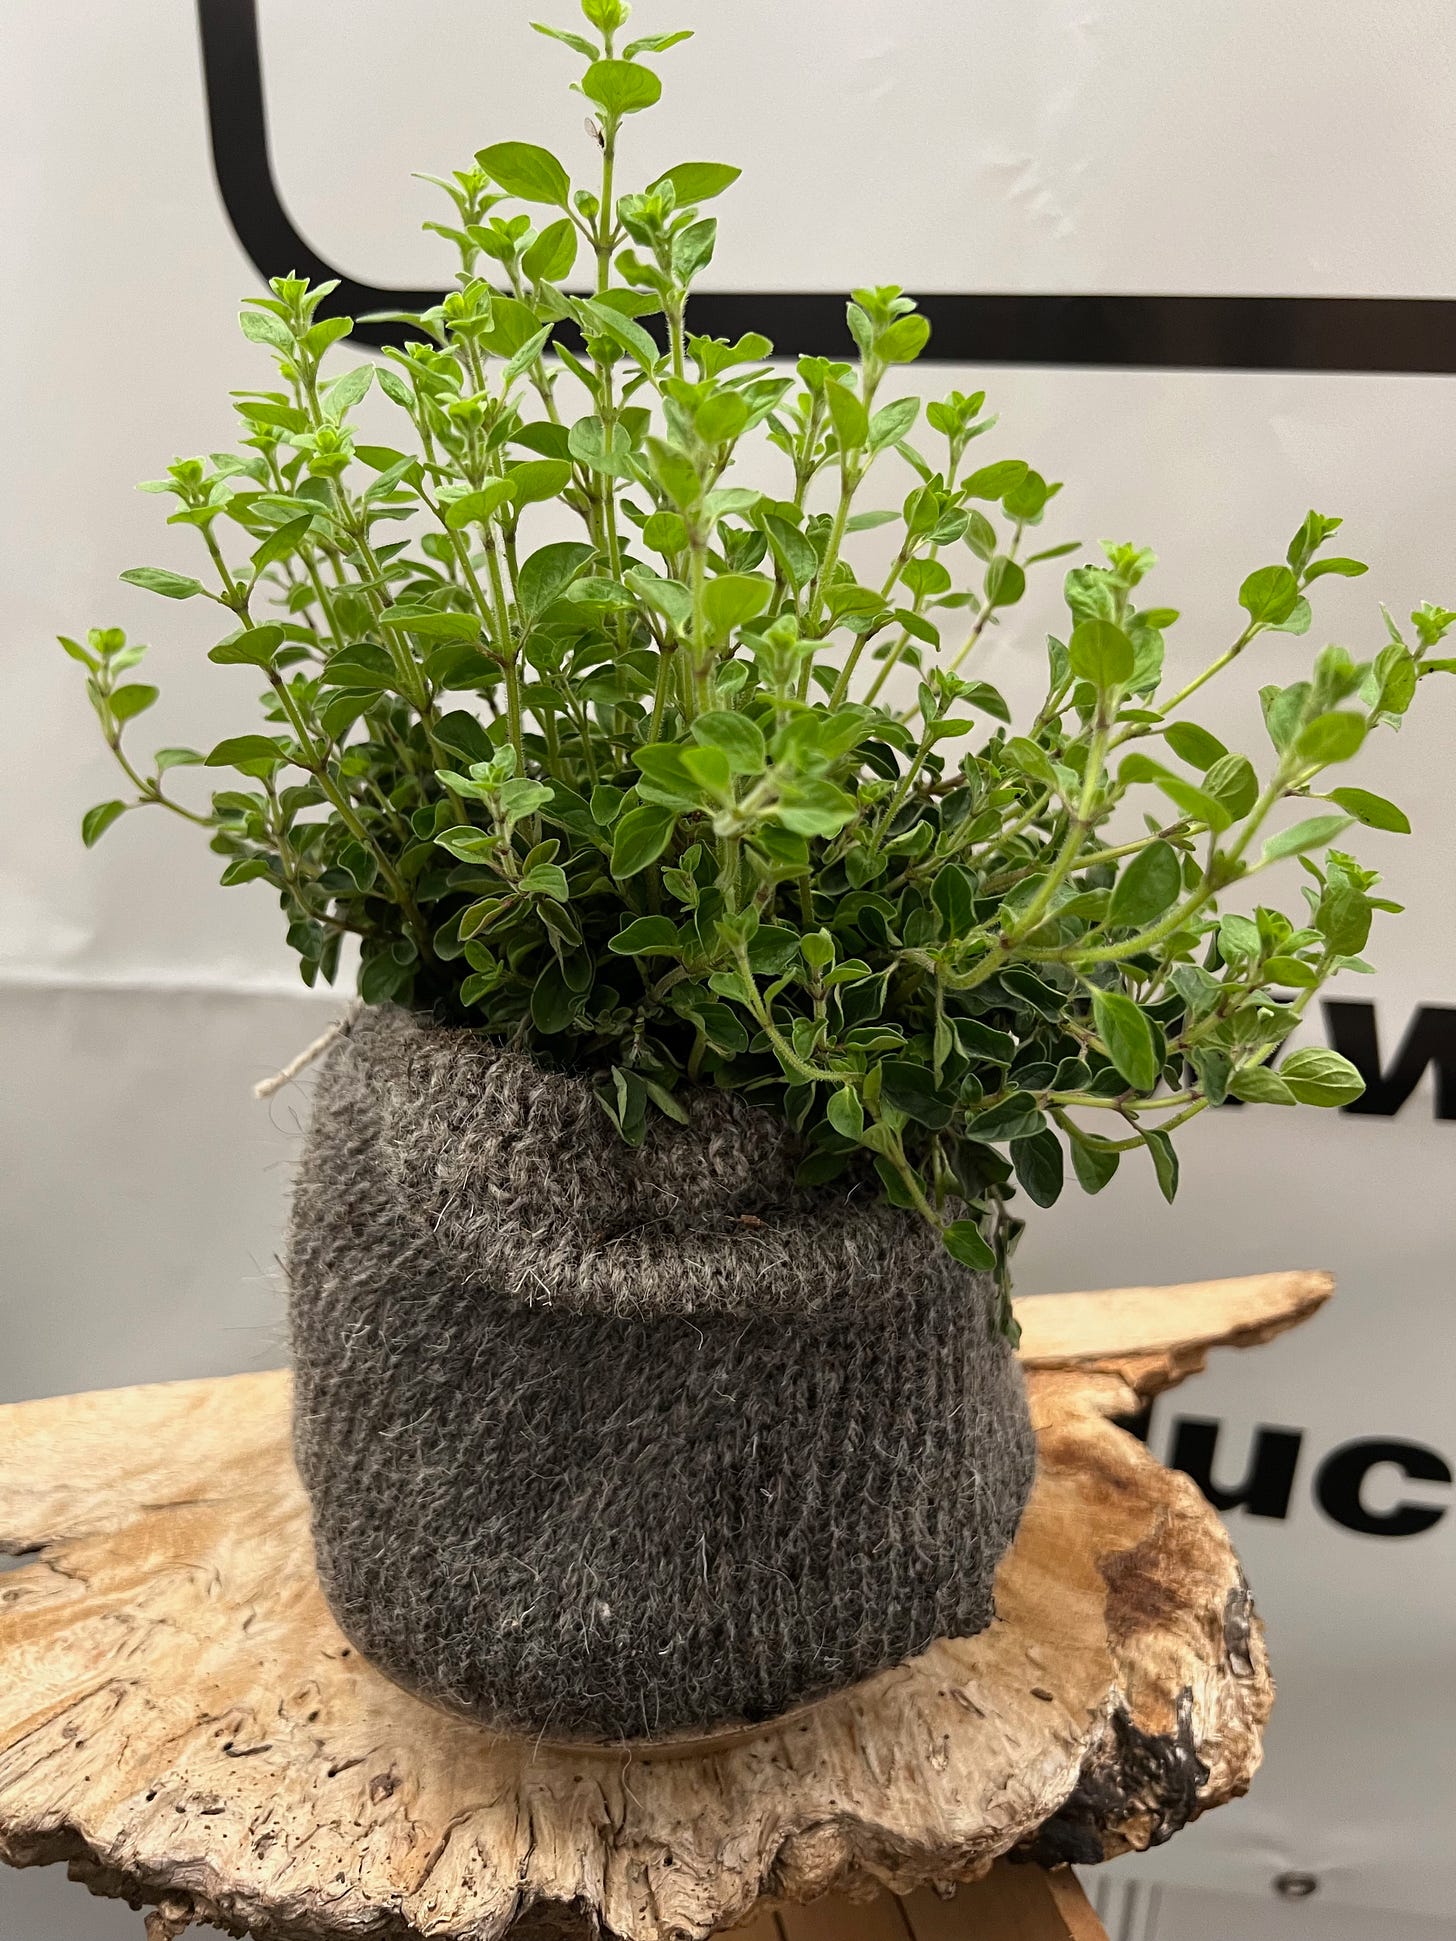 A wool pot filled with a healthy looking plant